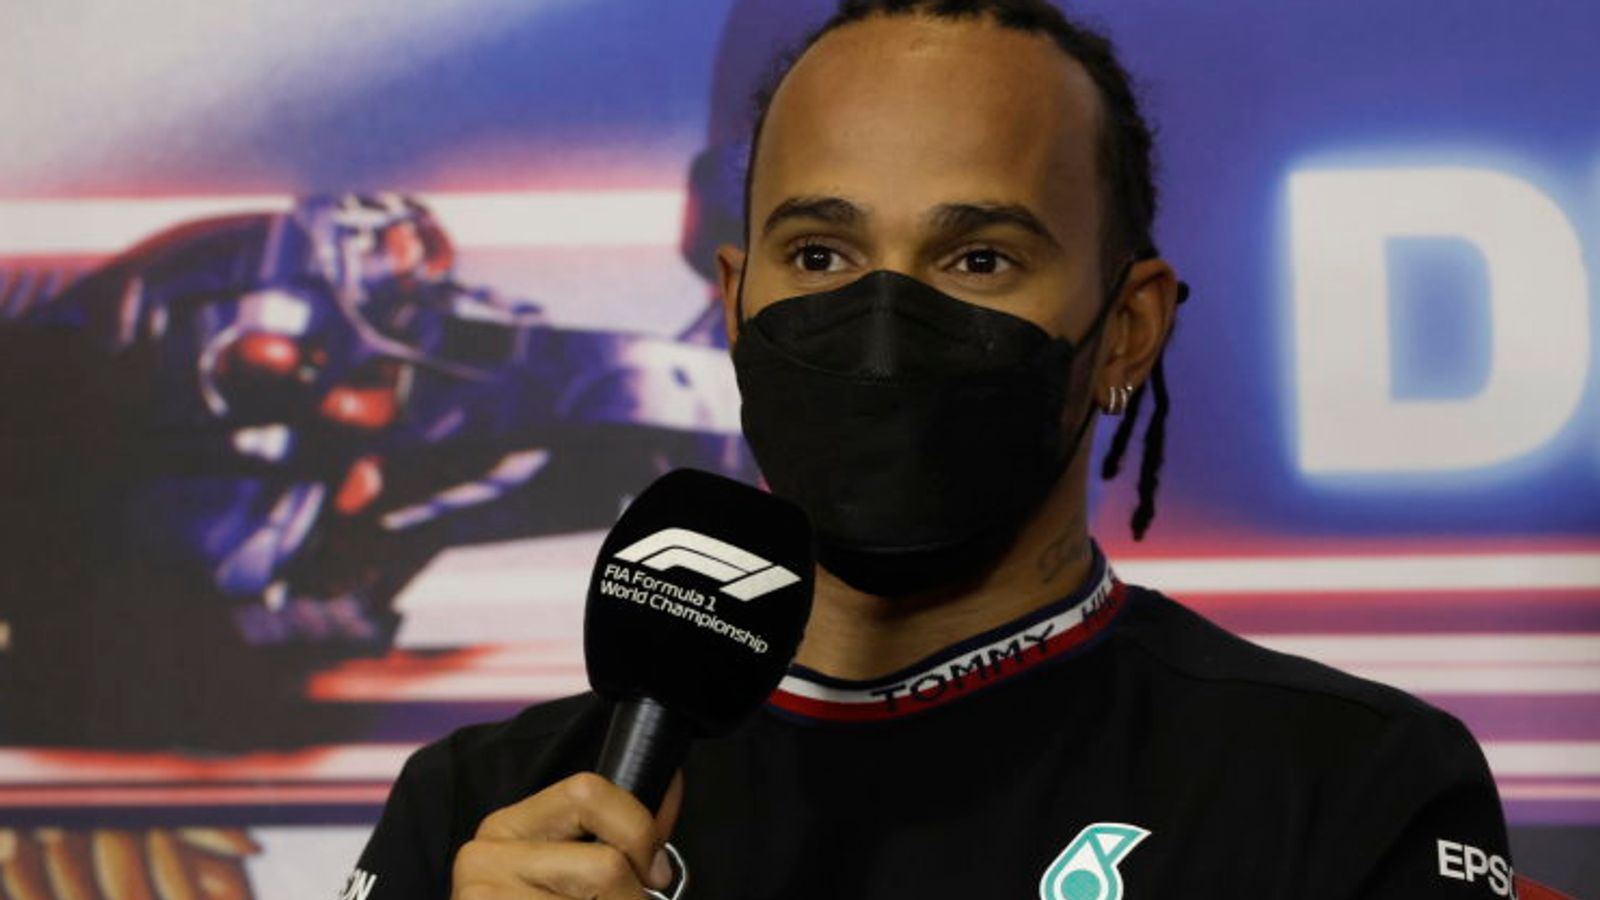 Mexico City GP: Lewis Hamilton says Mercedes shocked by qualifying and now prepare for different Red Bull challenge